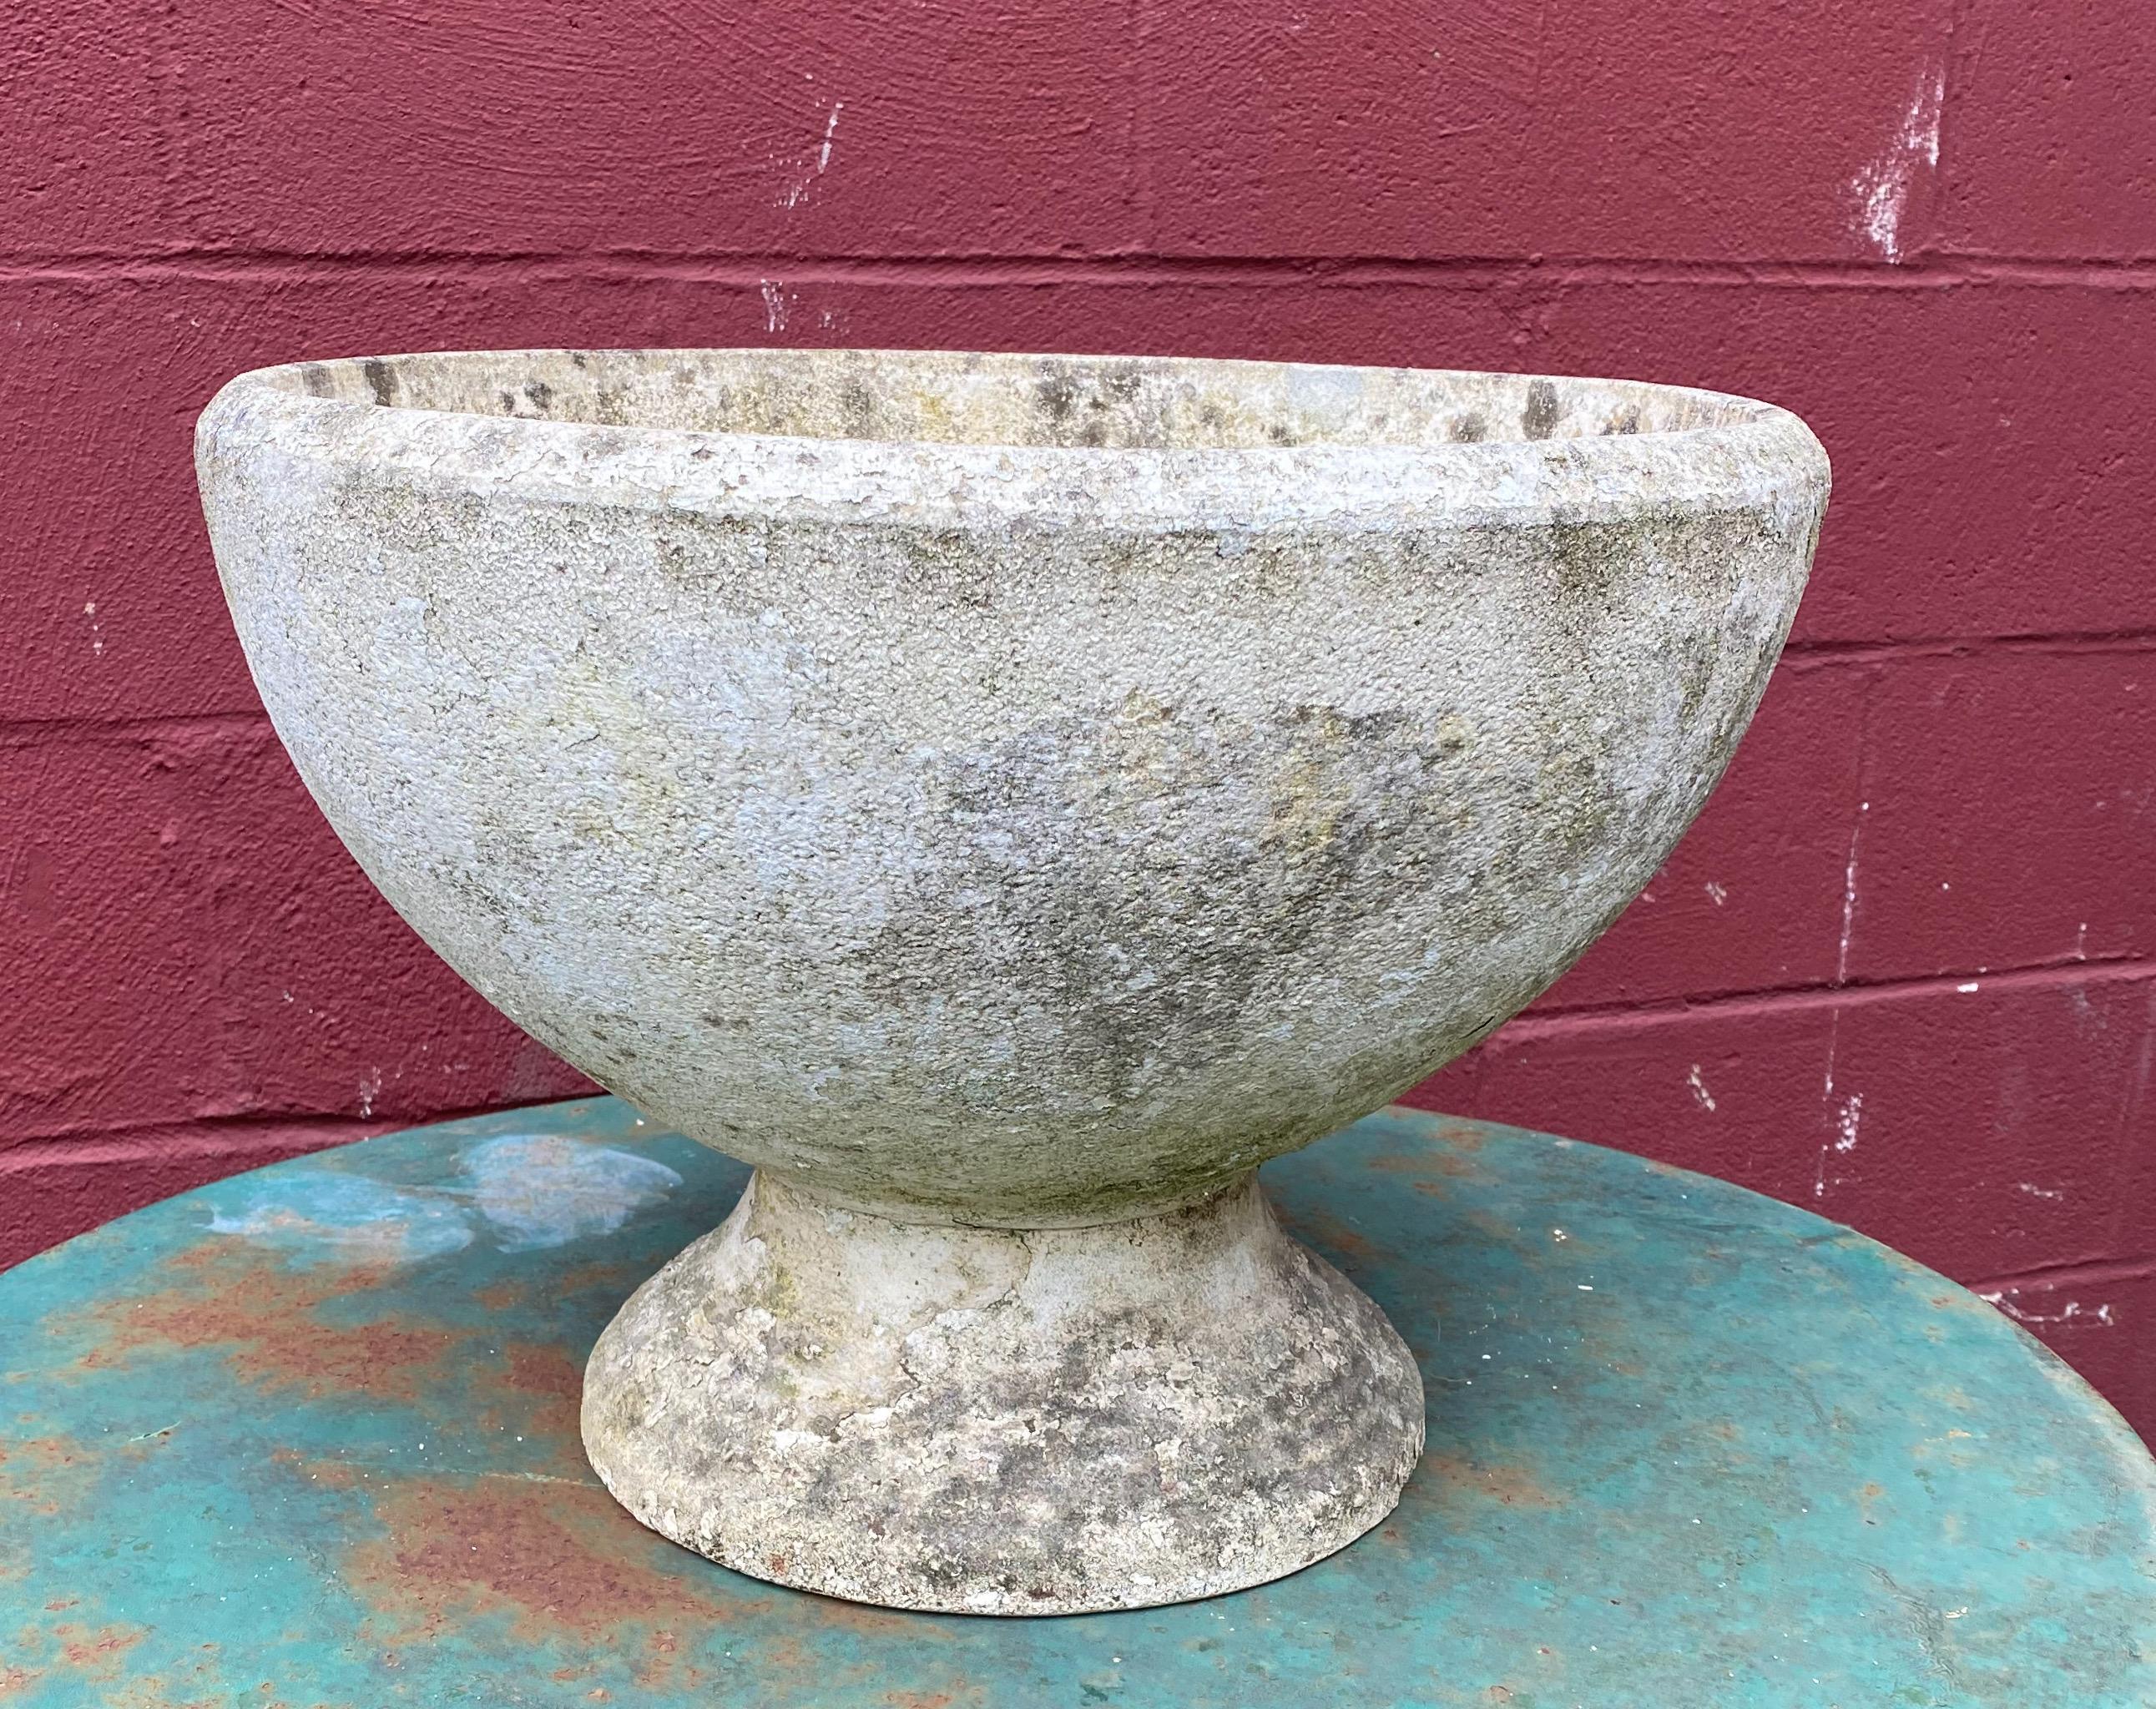 A French Mid-Century Modern planter made from reconstituted or cast stone that has a beautiful aged patina. The planter has a drainage hole and can be left outside in the rain. Great vintage condition. 

Ref# G0321-05

Dimensions: 14